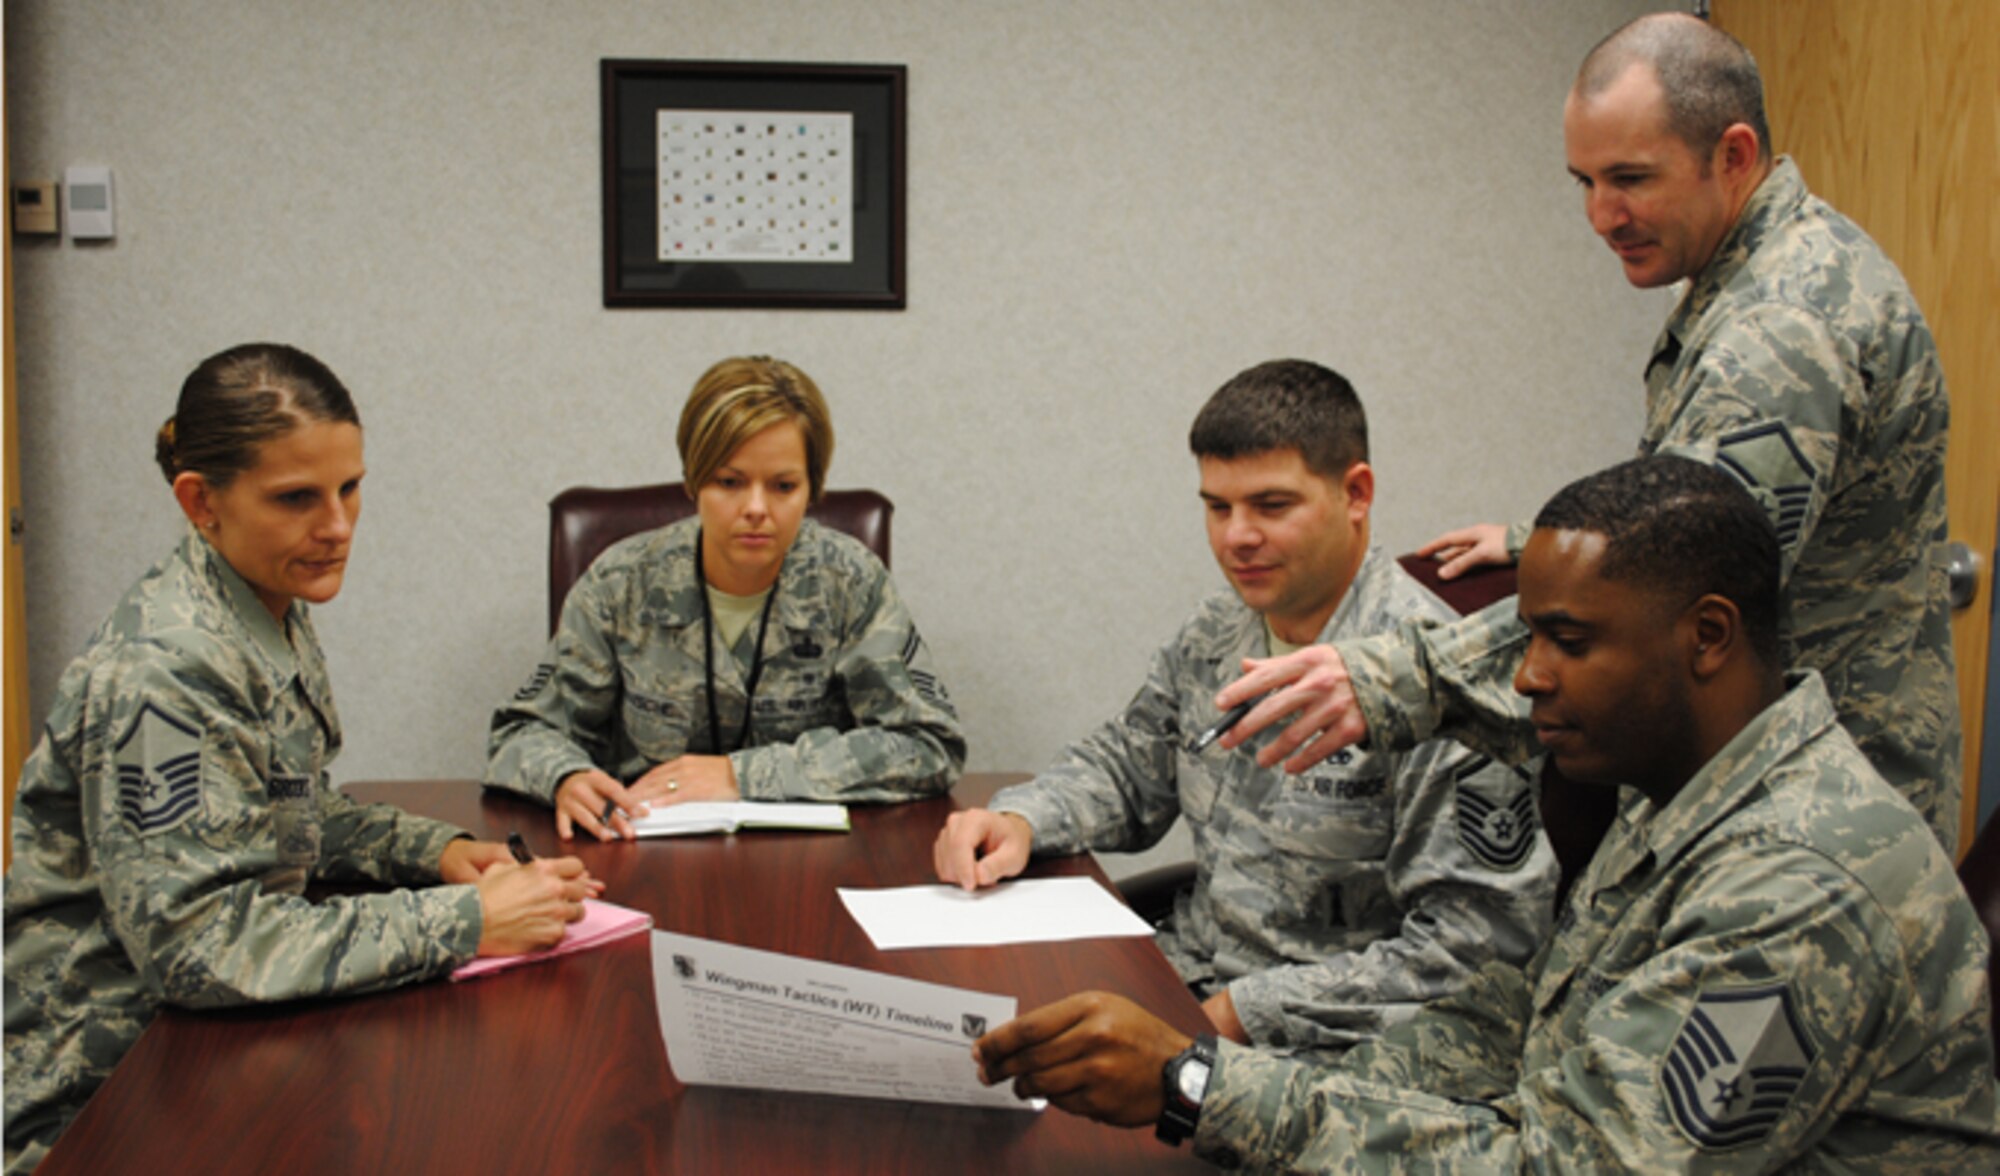 Master Sgt. Jena Brooks, far left and members of the Wingman Tactics Team look over best practices submitted by Airmen Oct. 15, 2014, at Langley Air Force Base, Va. Senior NCOs from the wing recently created the Wingman Tactics Review Process to collect and review best practices and disseminate them throughout the wing. Brooks is a 480th Intelligence, Surveillance and Reconnaissance Wing training superintendent. (U.S. Air Force photo/Marge McGlinn)